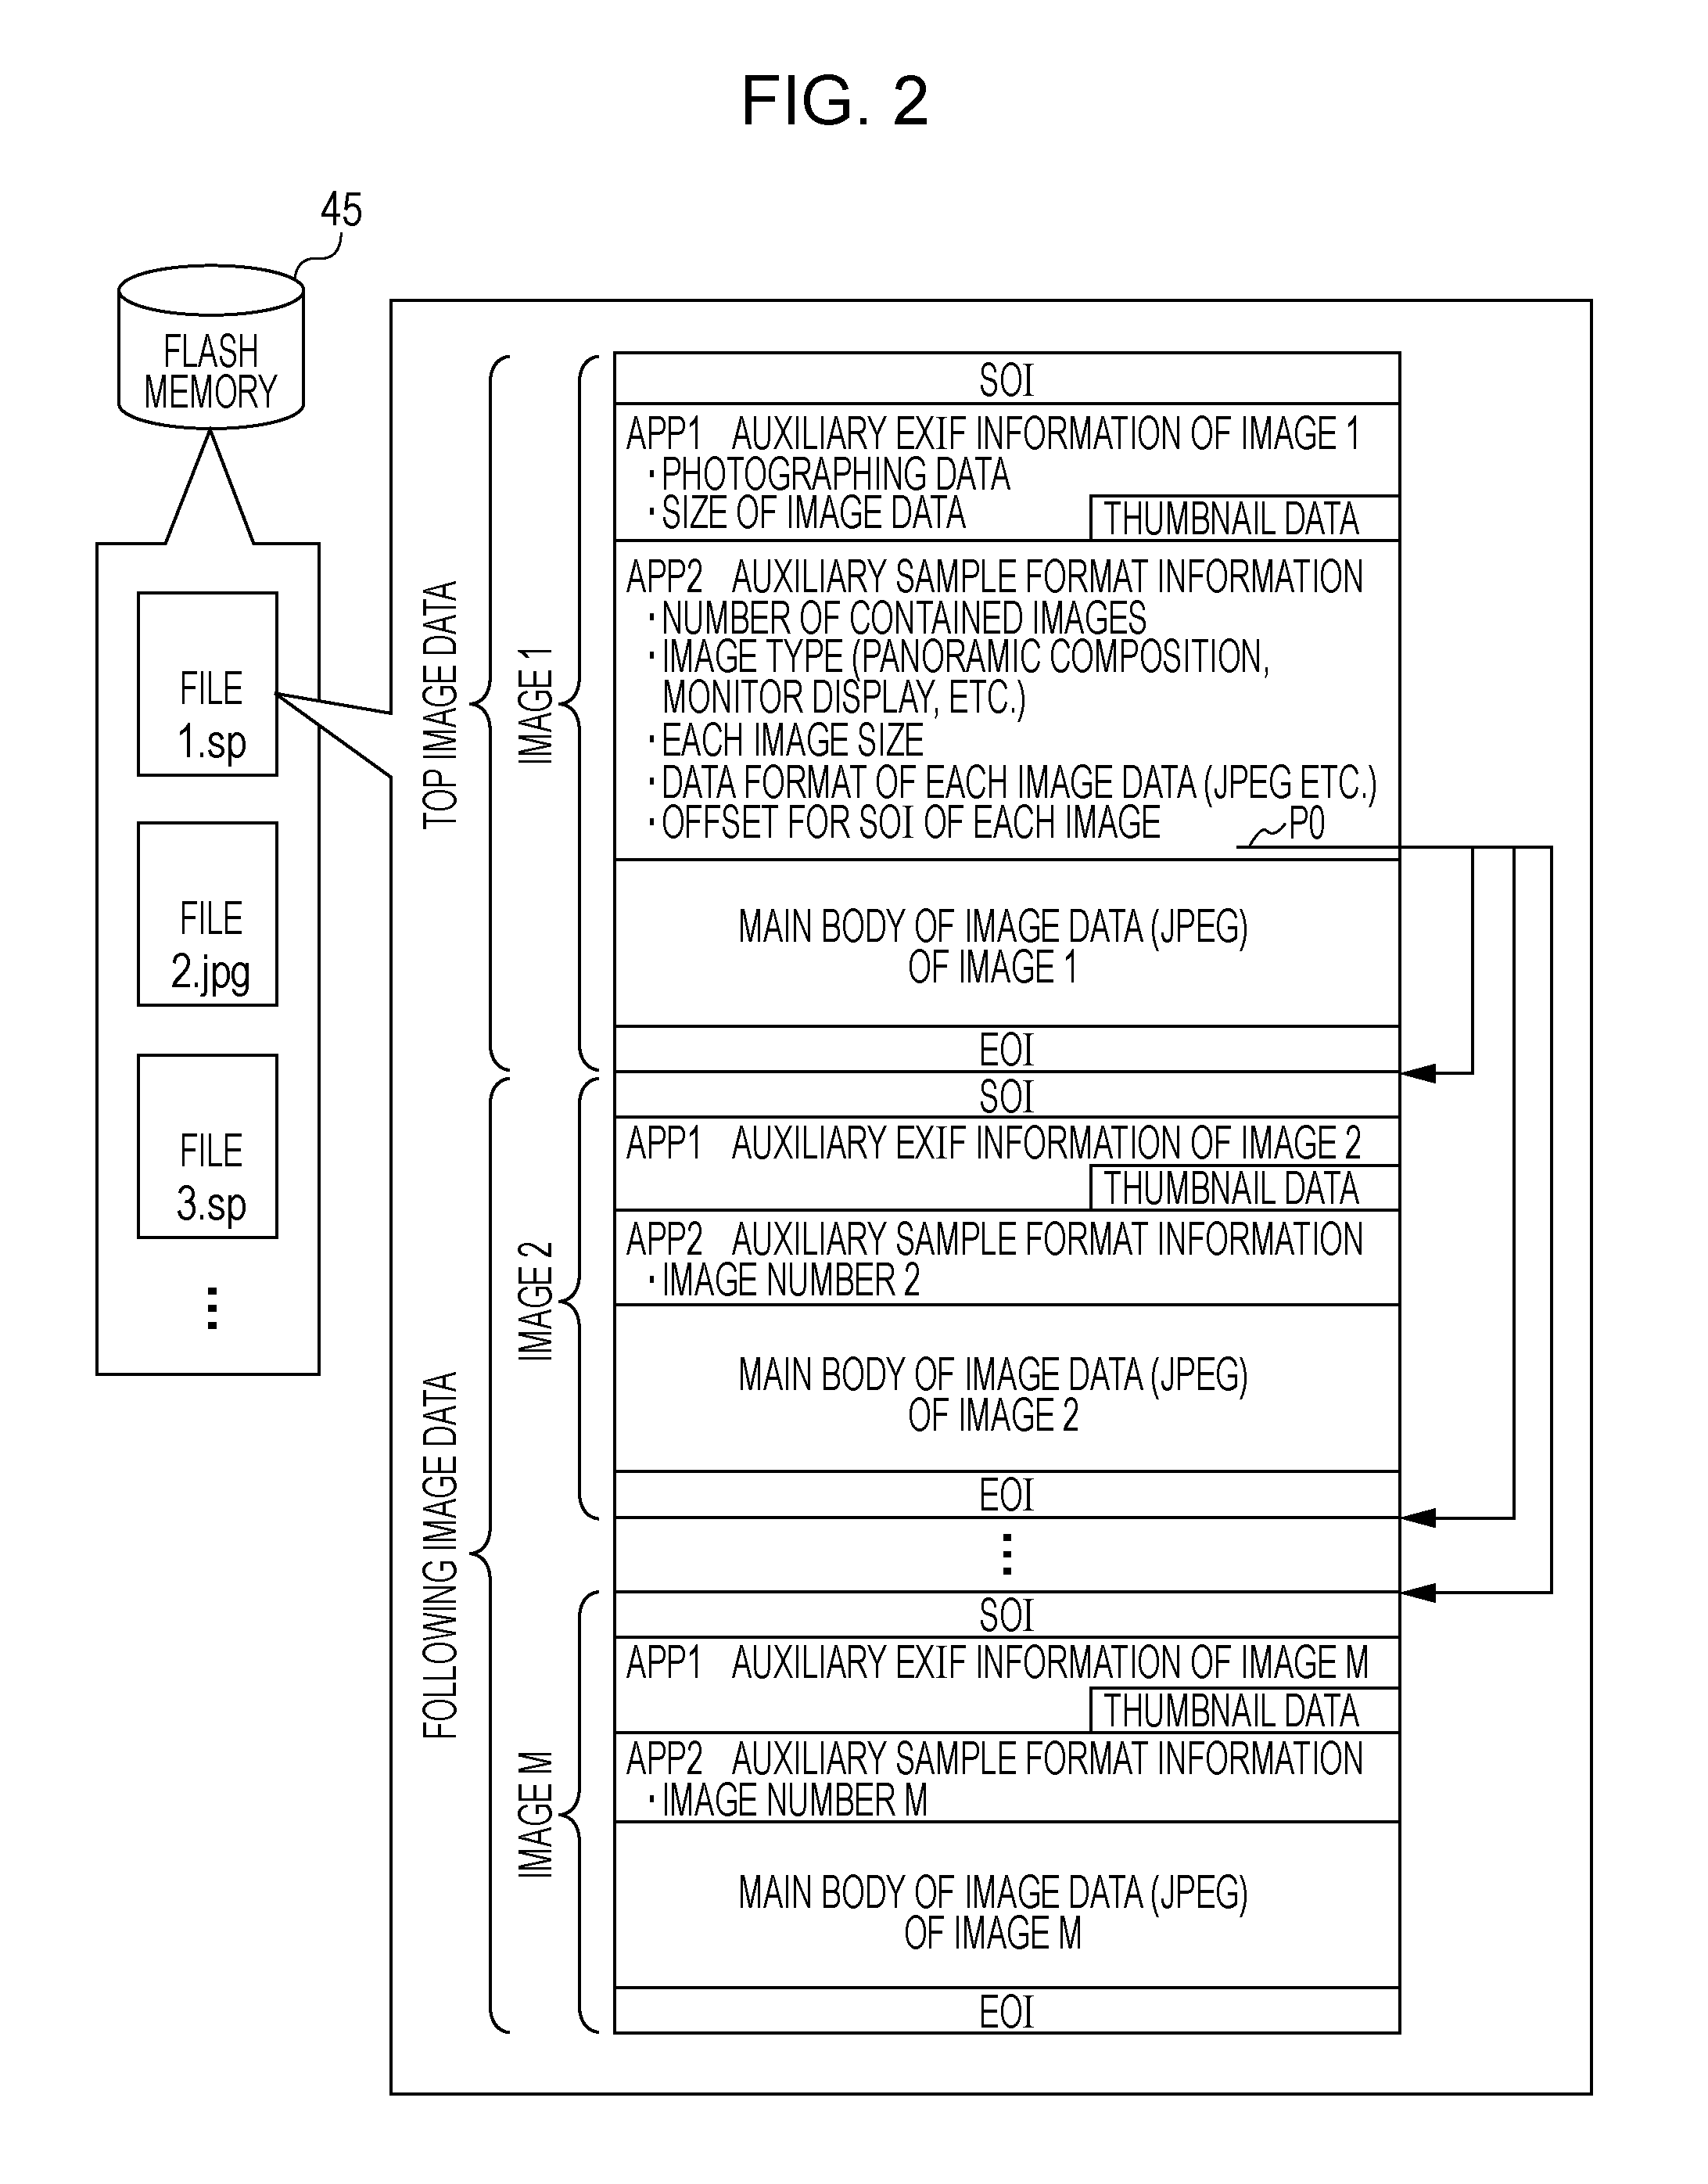 Print instruction apparatus and printing system